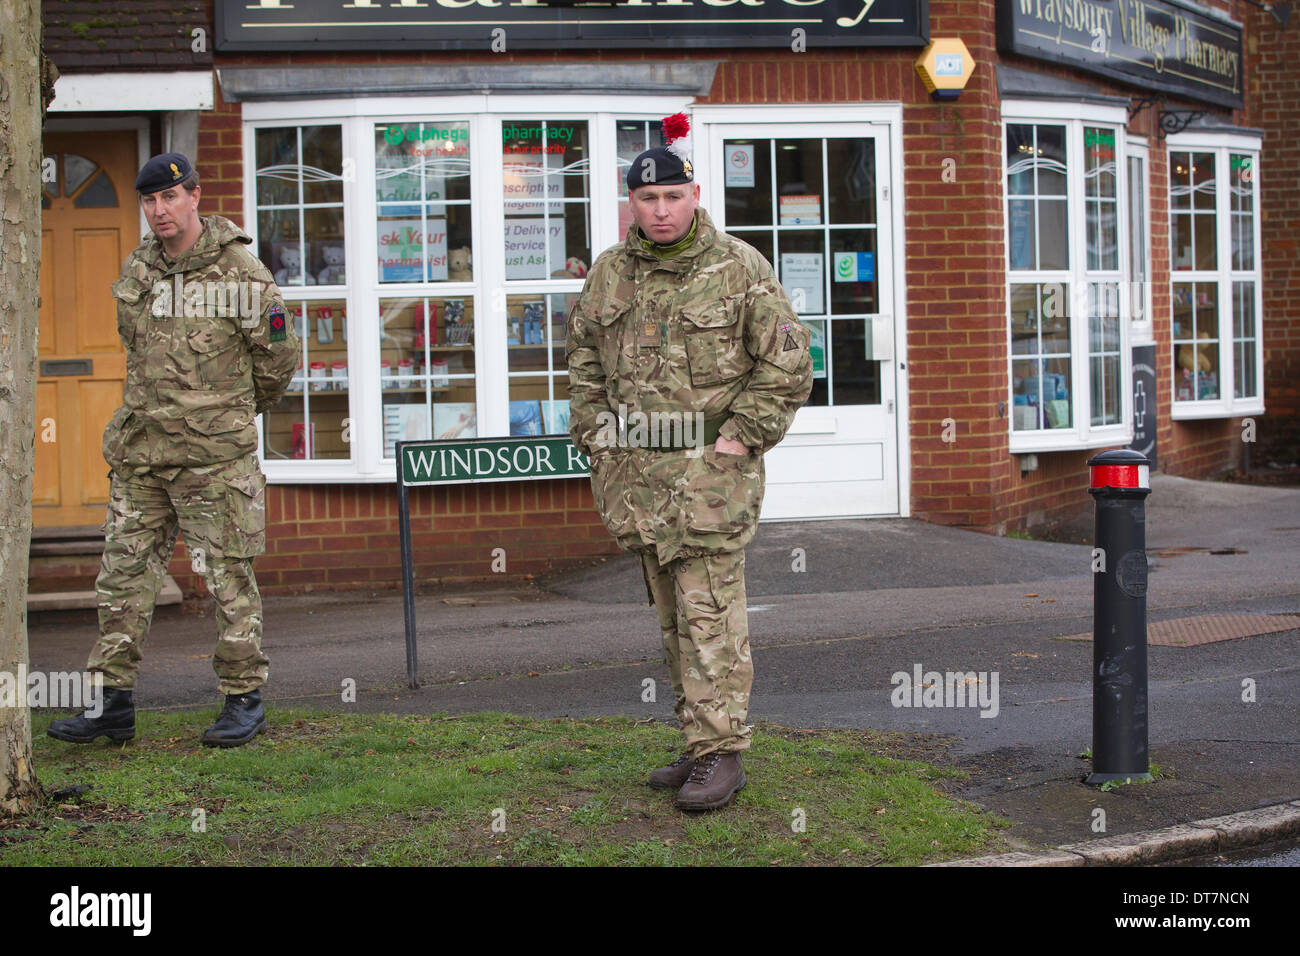 Datchet, Berkshire, UK. 11th Feb, 2014. Picture shows Royal Engineer & Fusilier Military on the high street in Datchet in the Thames Valley area West of London. Hundreds of families are having to leave their houses due to the rising water levels across the region. Credit:  Jeff Gilbert/Alamy Live News Stock Photo